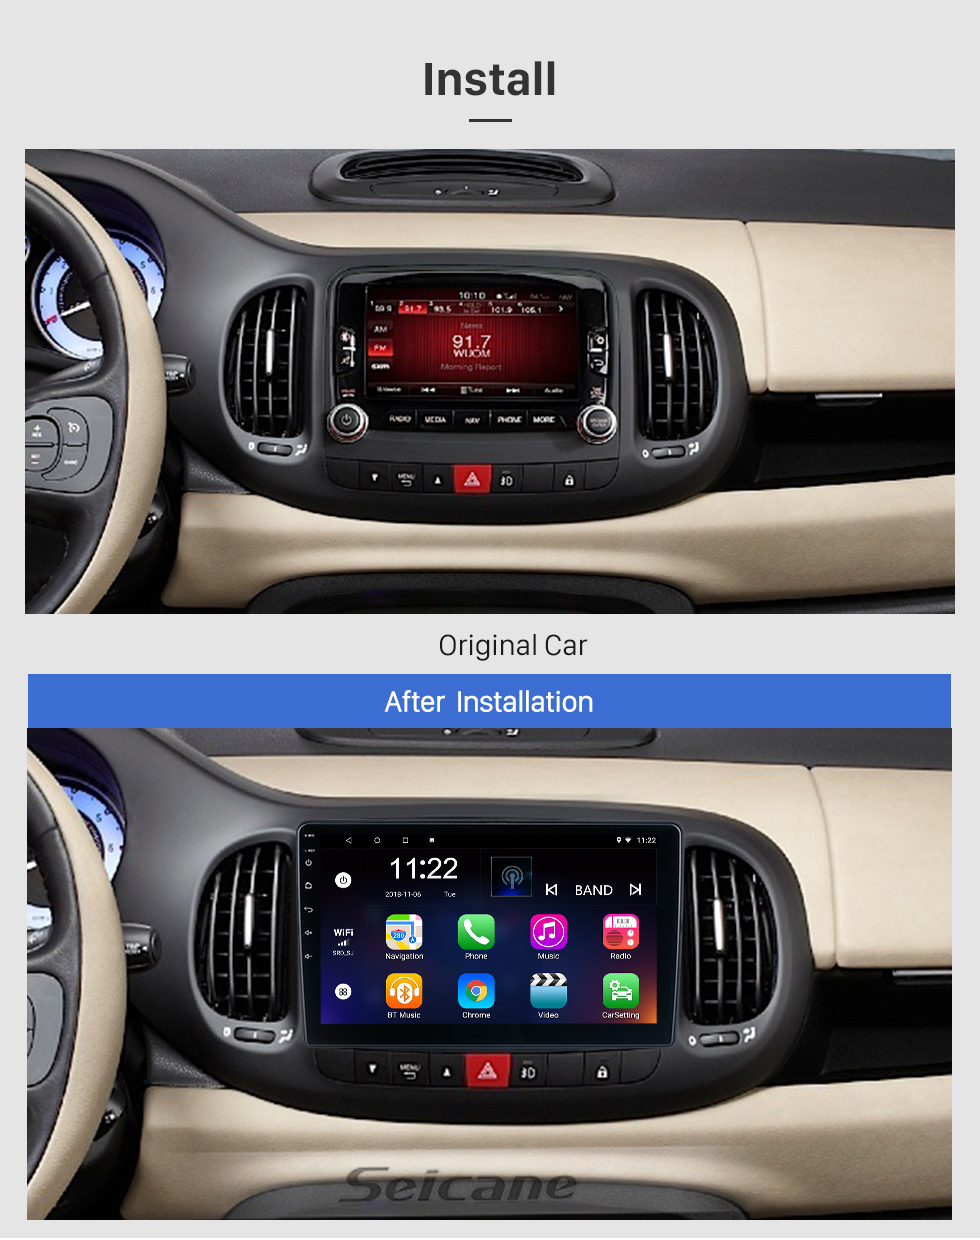 Seicane OEM 10.1 inch Android 10.0 for 2012 Fia 500L Radio with Bluetooth HD Touchscreen GPS Navigation System support Carplay DAB+